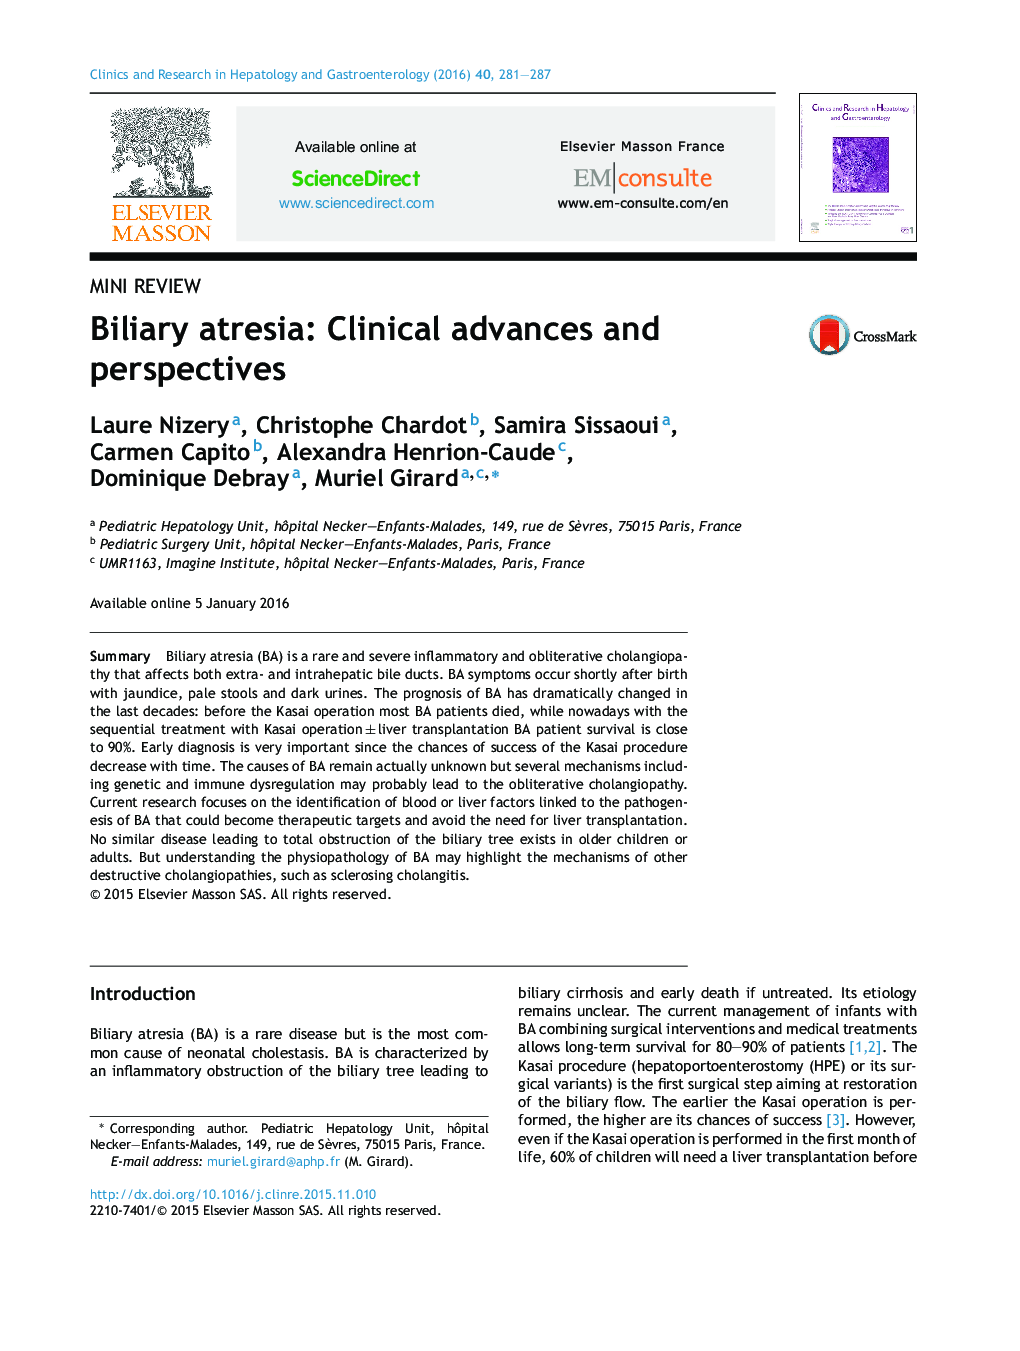 Biliary atresia: Clinical advances and perspectives